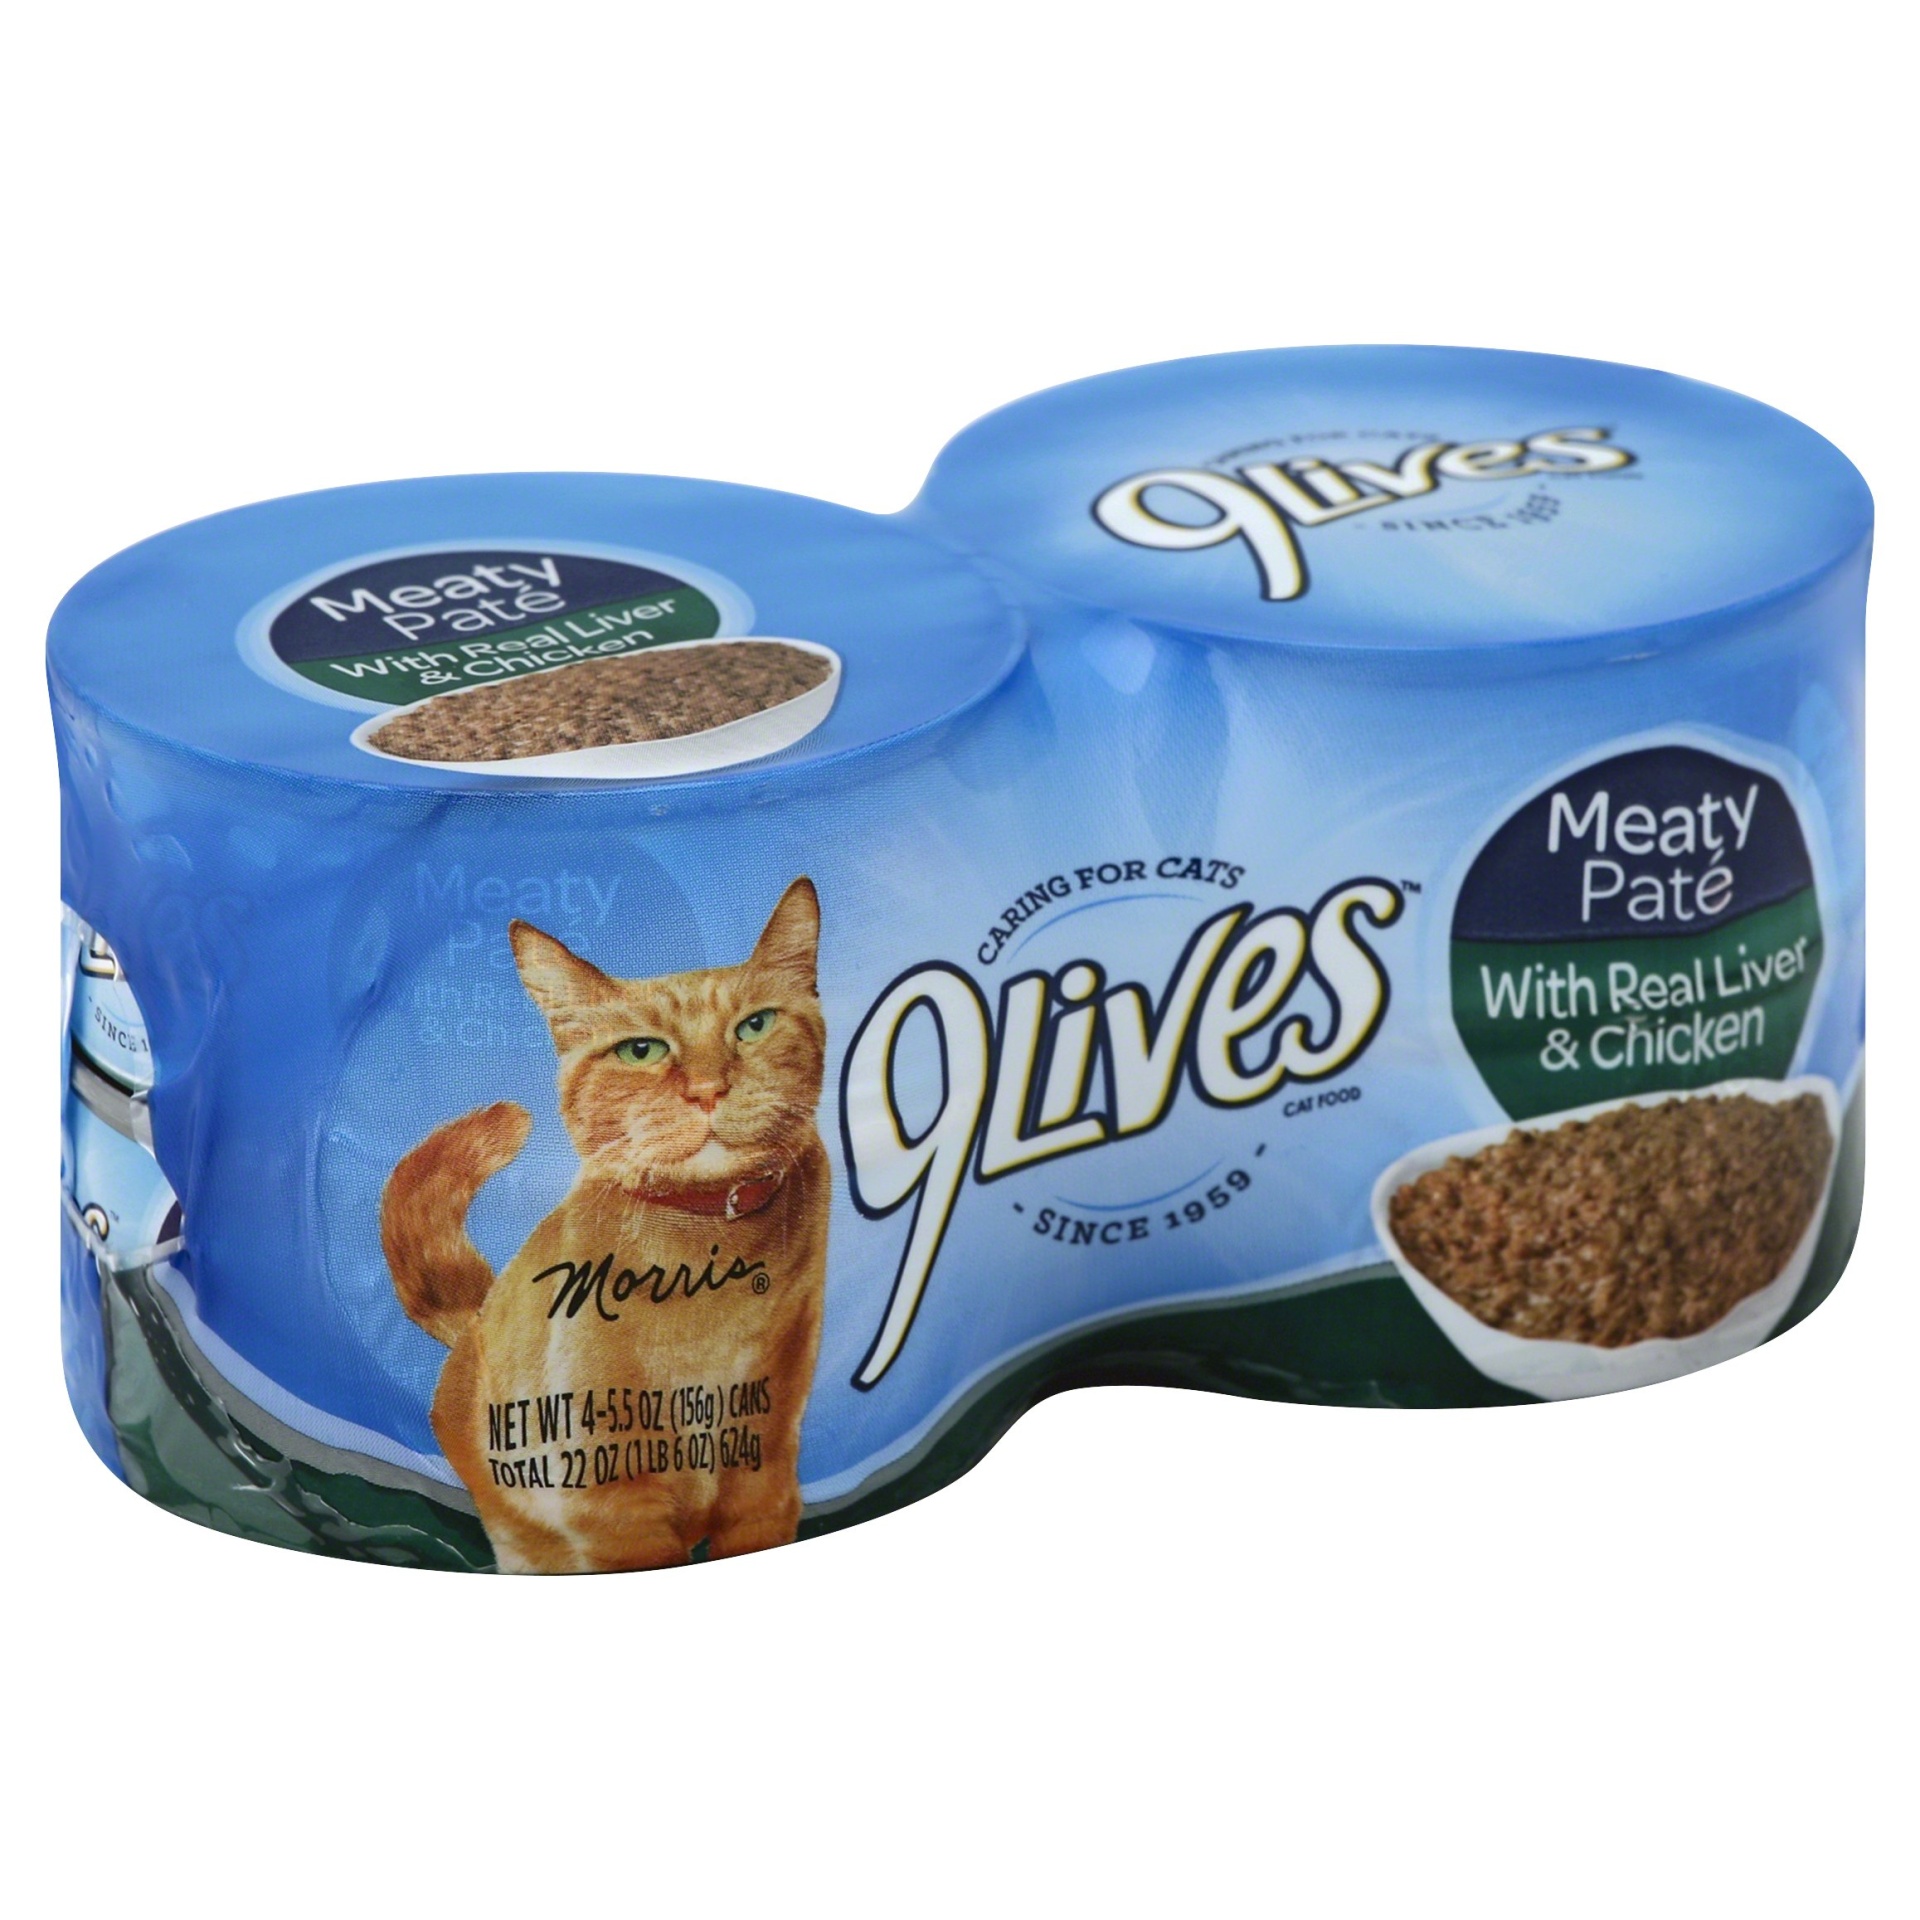 slide 1 of 1, 9Lives Cat Food, Meaty Pate with Liver & Bacon, 4 ct; 5.5 oz